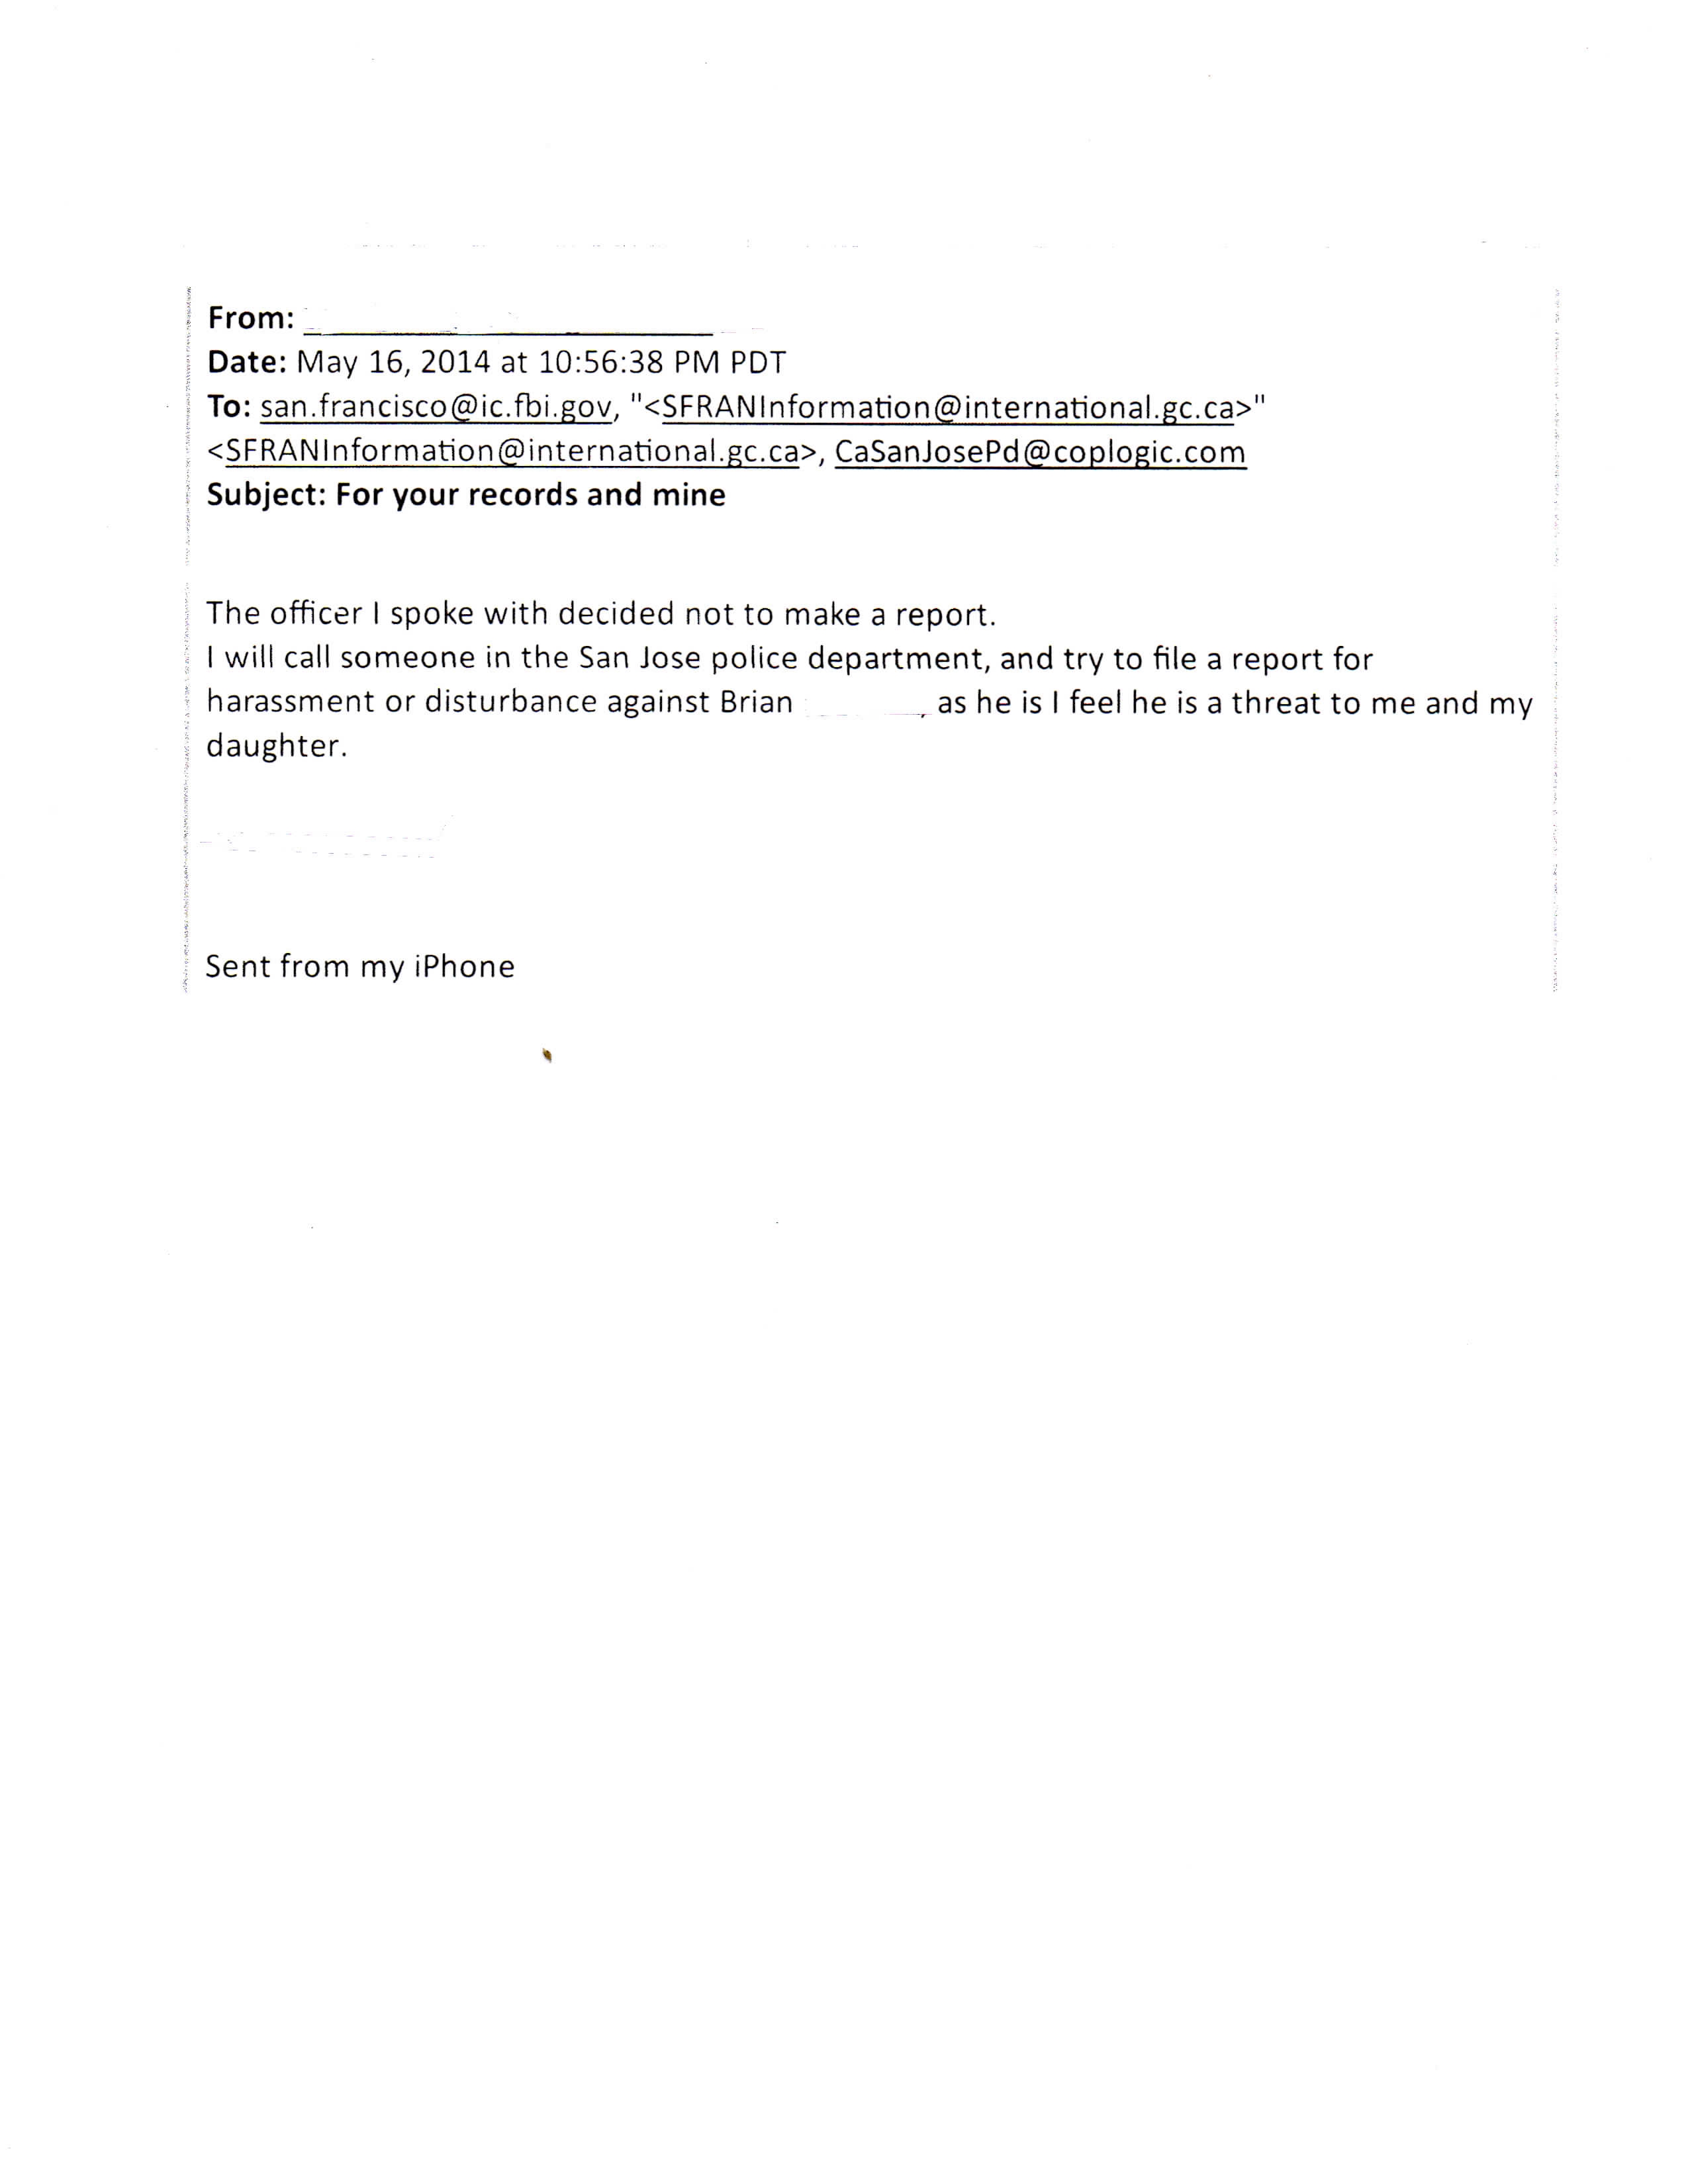 Email to FBI San Francisco, Canadian Consulate and SJPD Report number 141359566